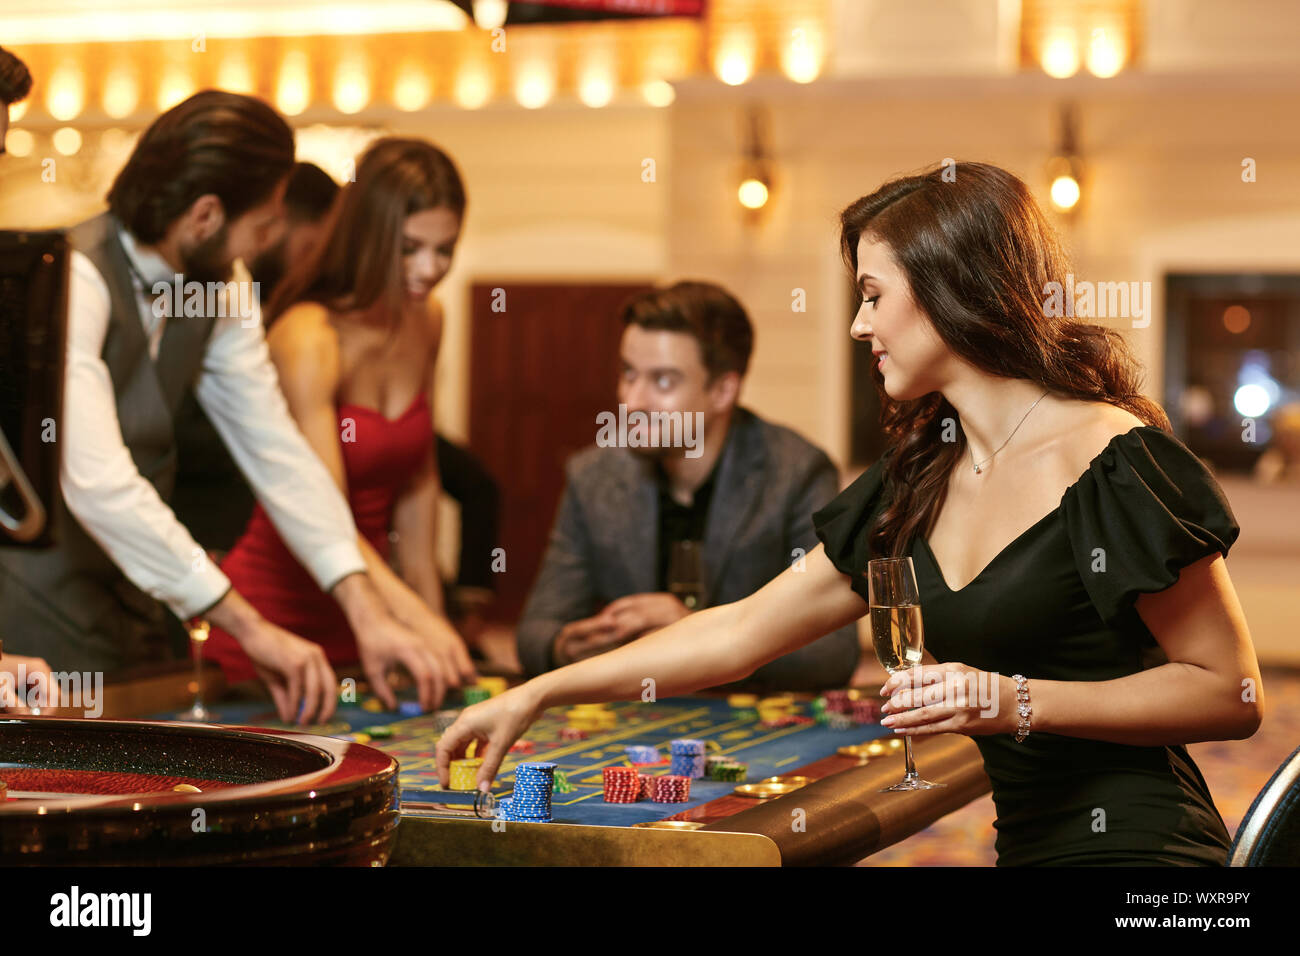 A young woman sitting at table roulette playing poker at a casino. Stock Photo